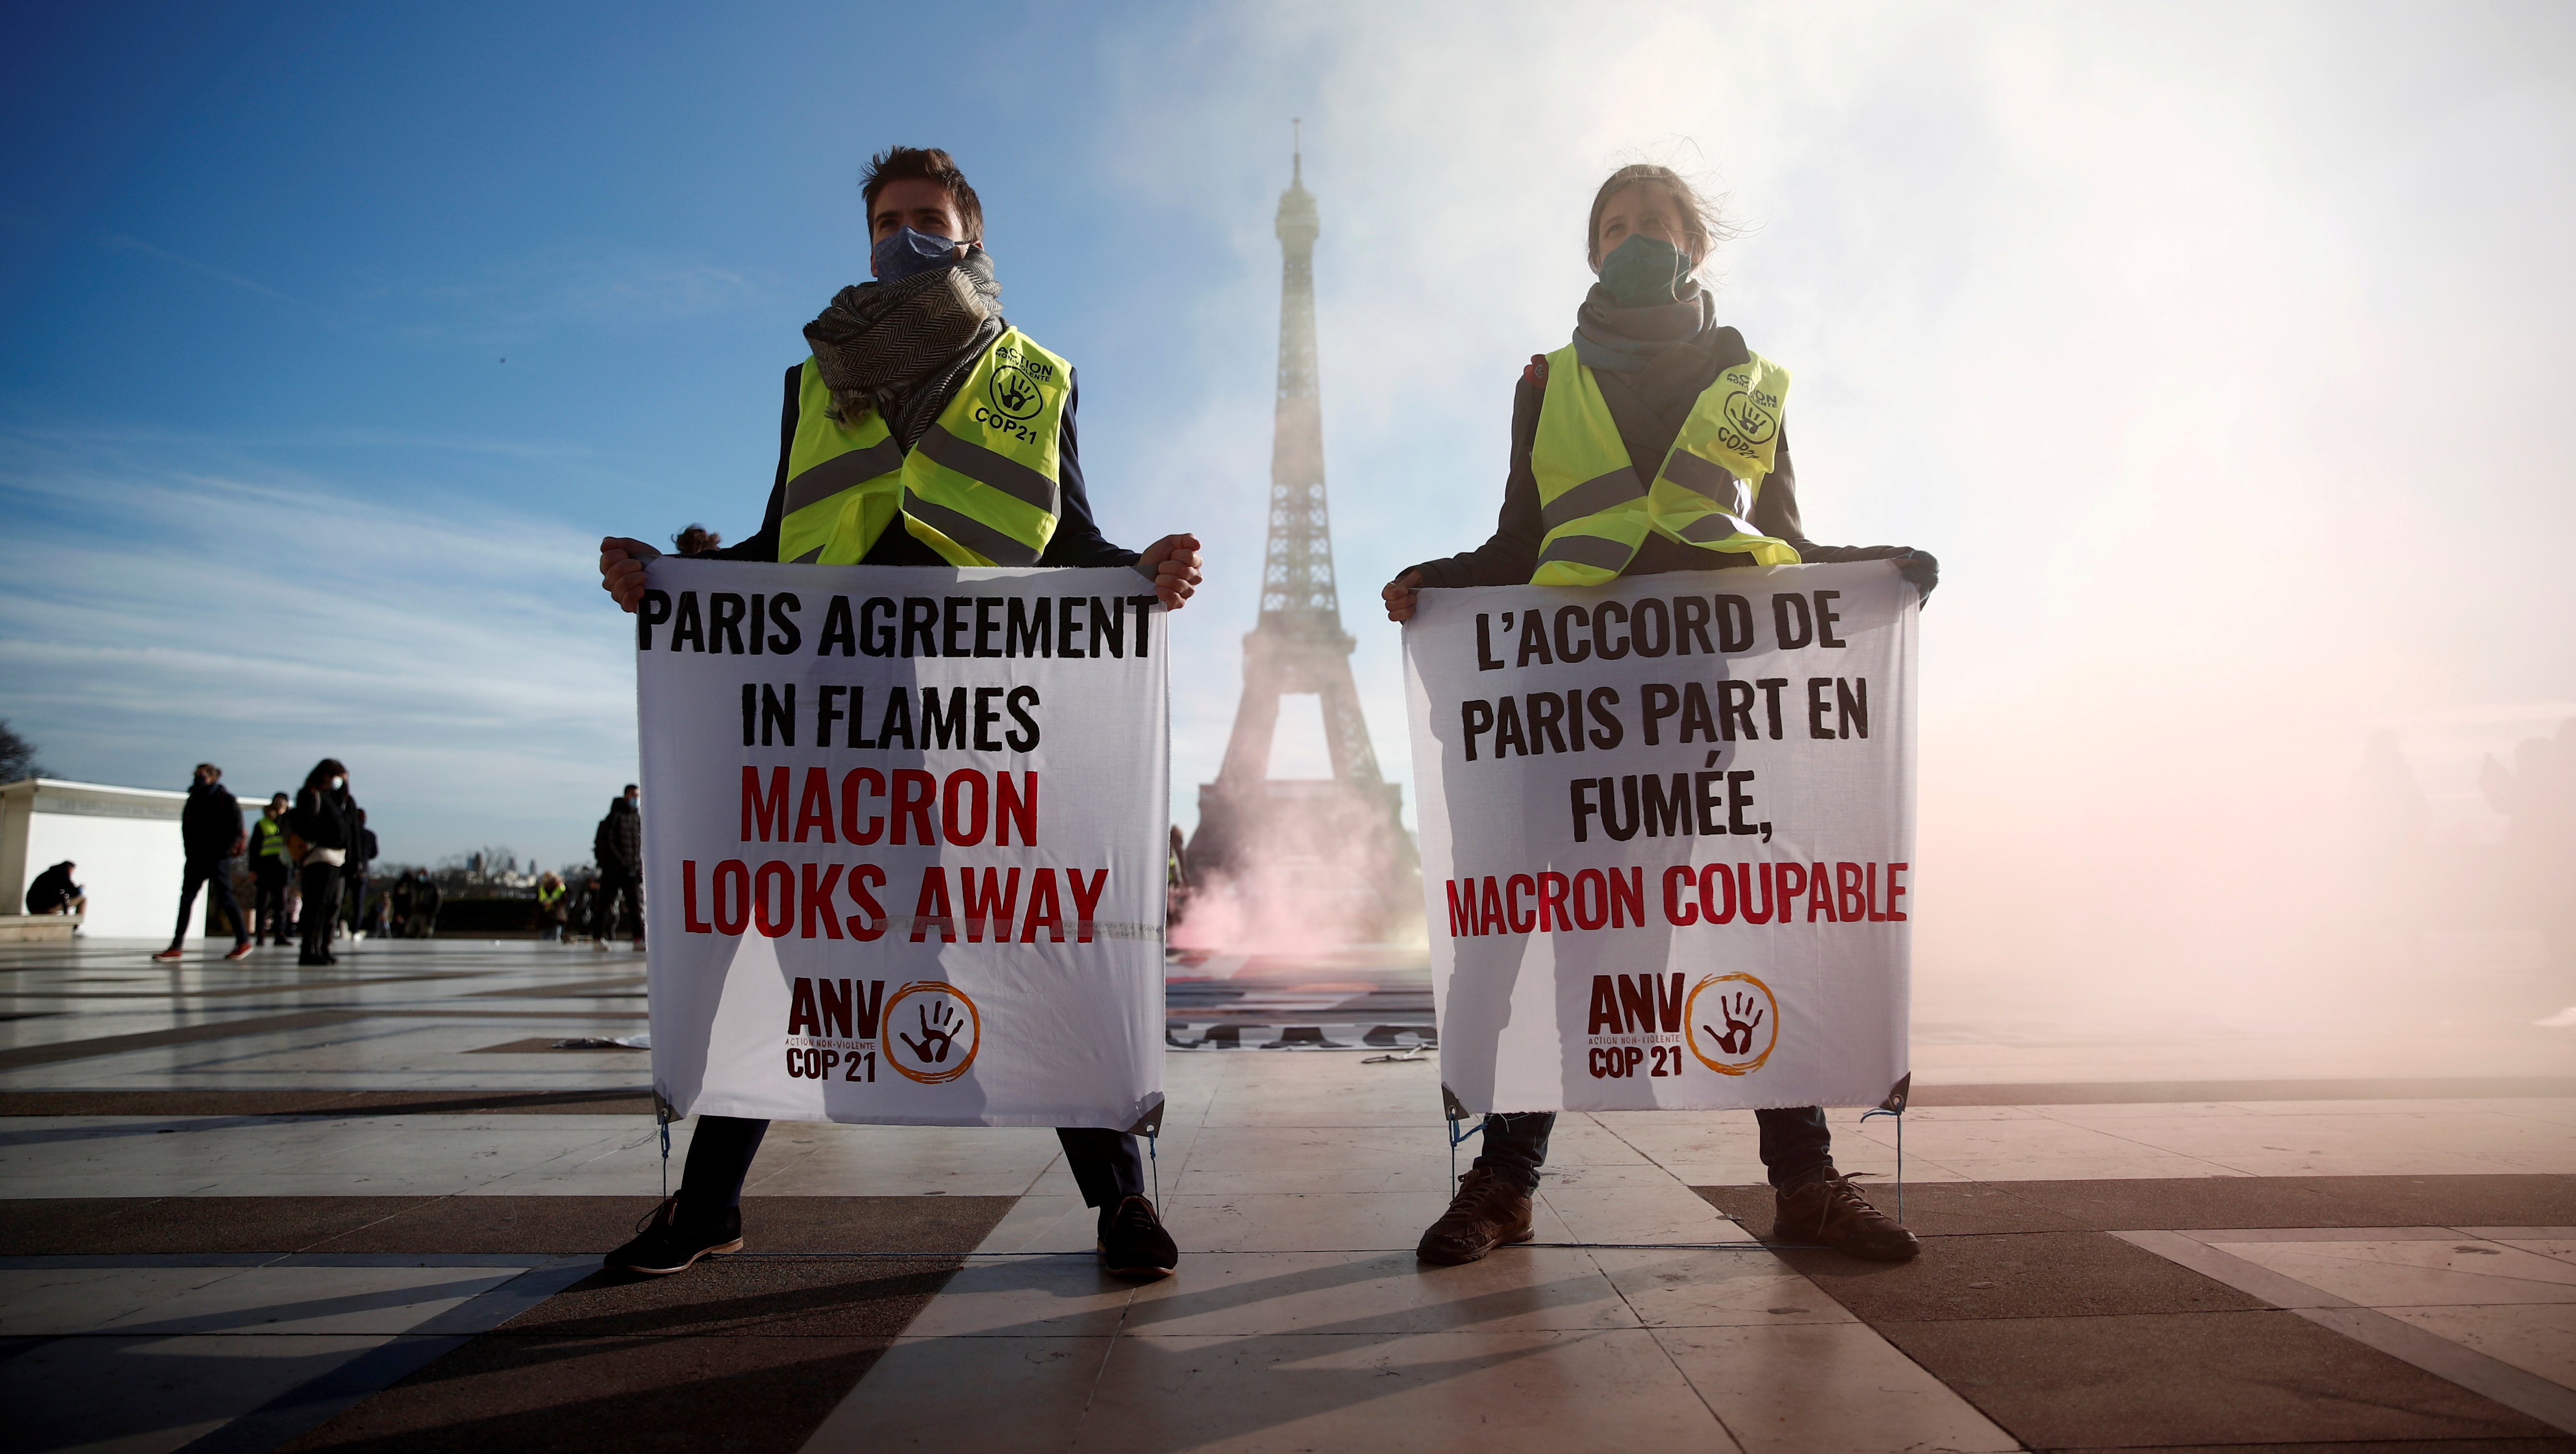 Climate activists demonstrate in front of the Eiffel Tower to mark the fifth anniversary of the 2015 UN Paris agreement on climate change, in Paris on December 10 last year. Slowing global warming is one of the key goals of the 2030 agenda. Photo: Reuters